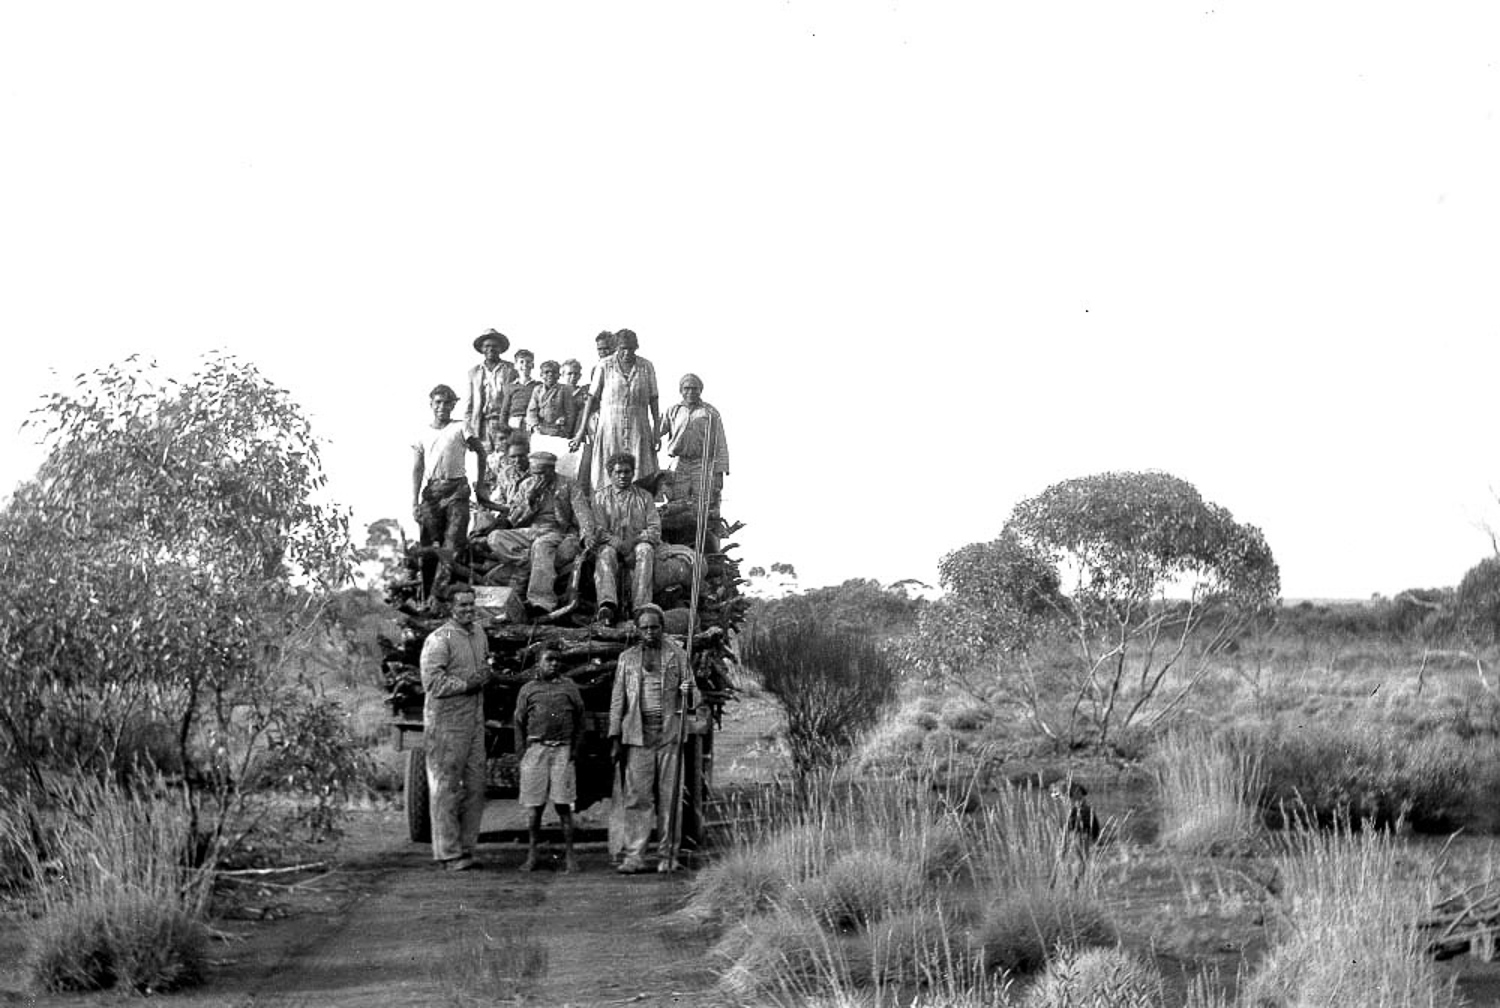 Anangu men were employed to cut sandlewood for shipment to India and China as part of mission life. Many of the missions around Australia forced Aboriginal and Torres Strait Islander people into labour, such as on farms and pastoral stations, for which they were often never paid, or were given rations of flour, sugar, tea and blankets instead of a wage. 